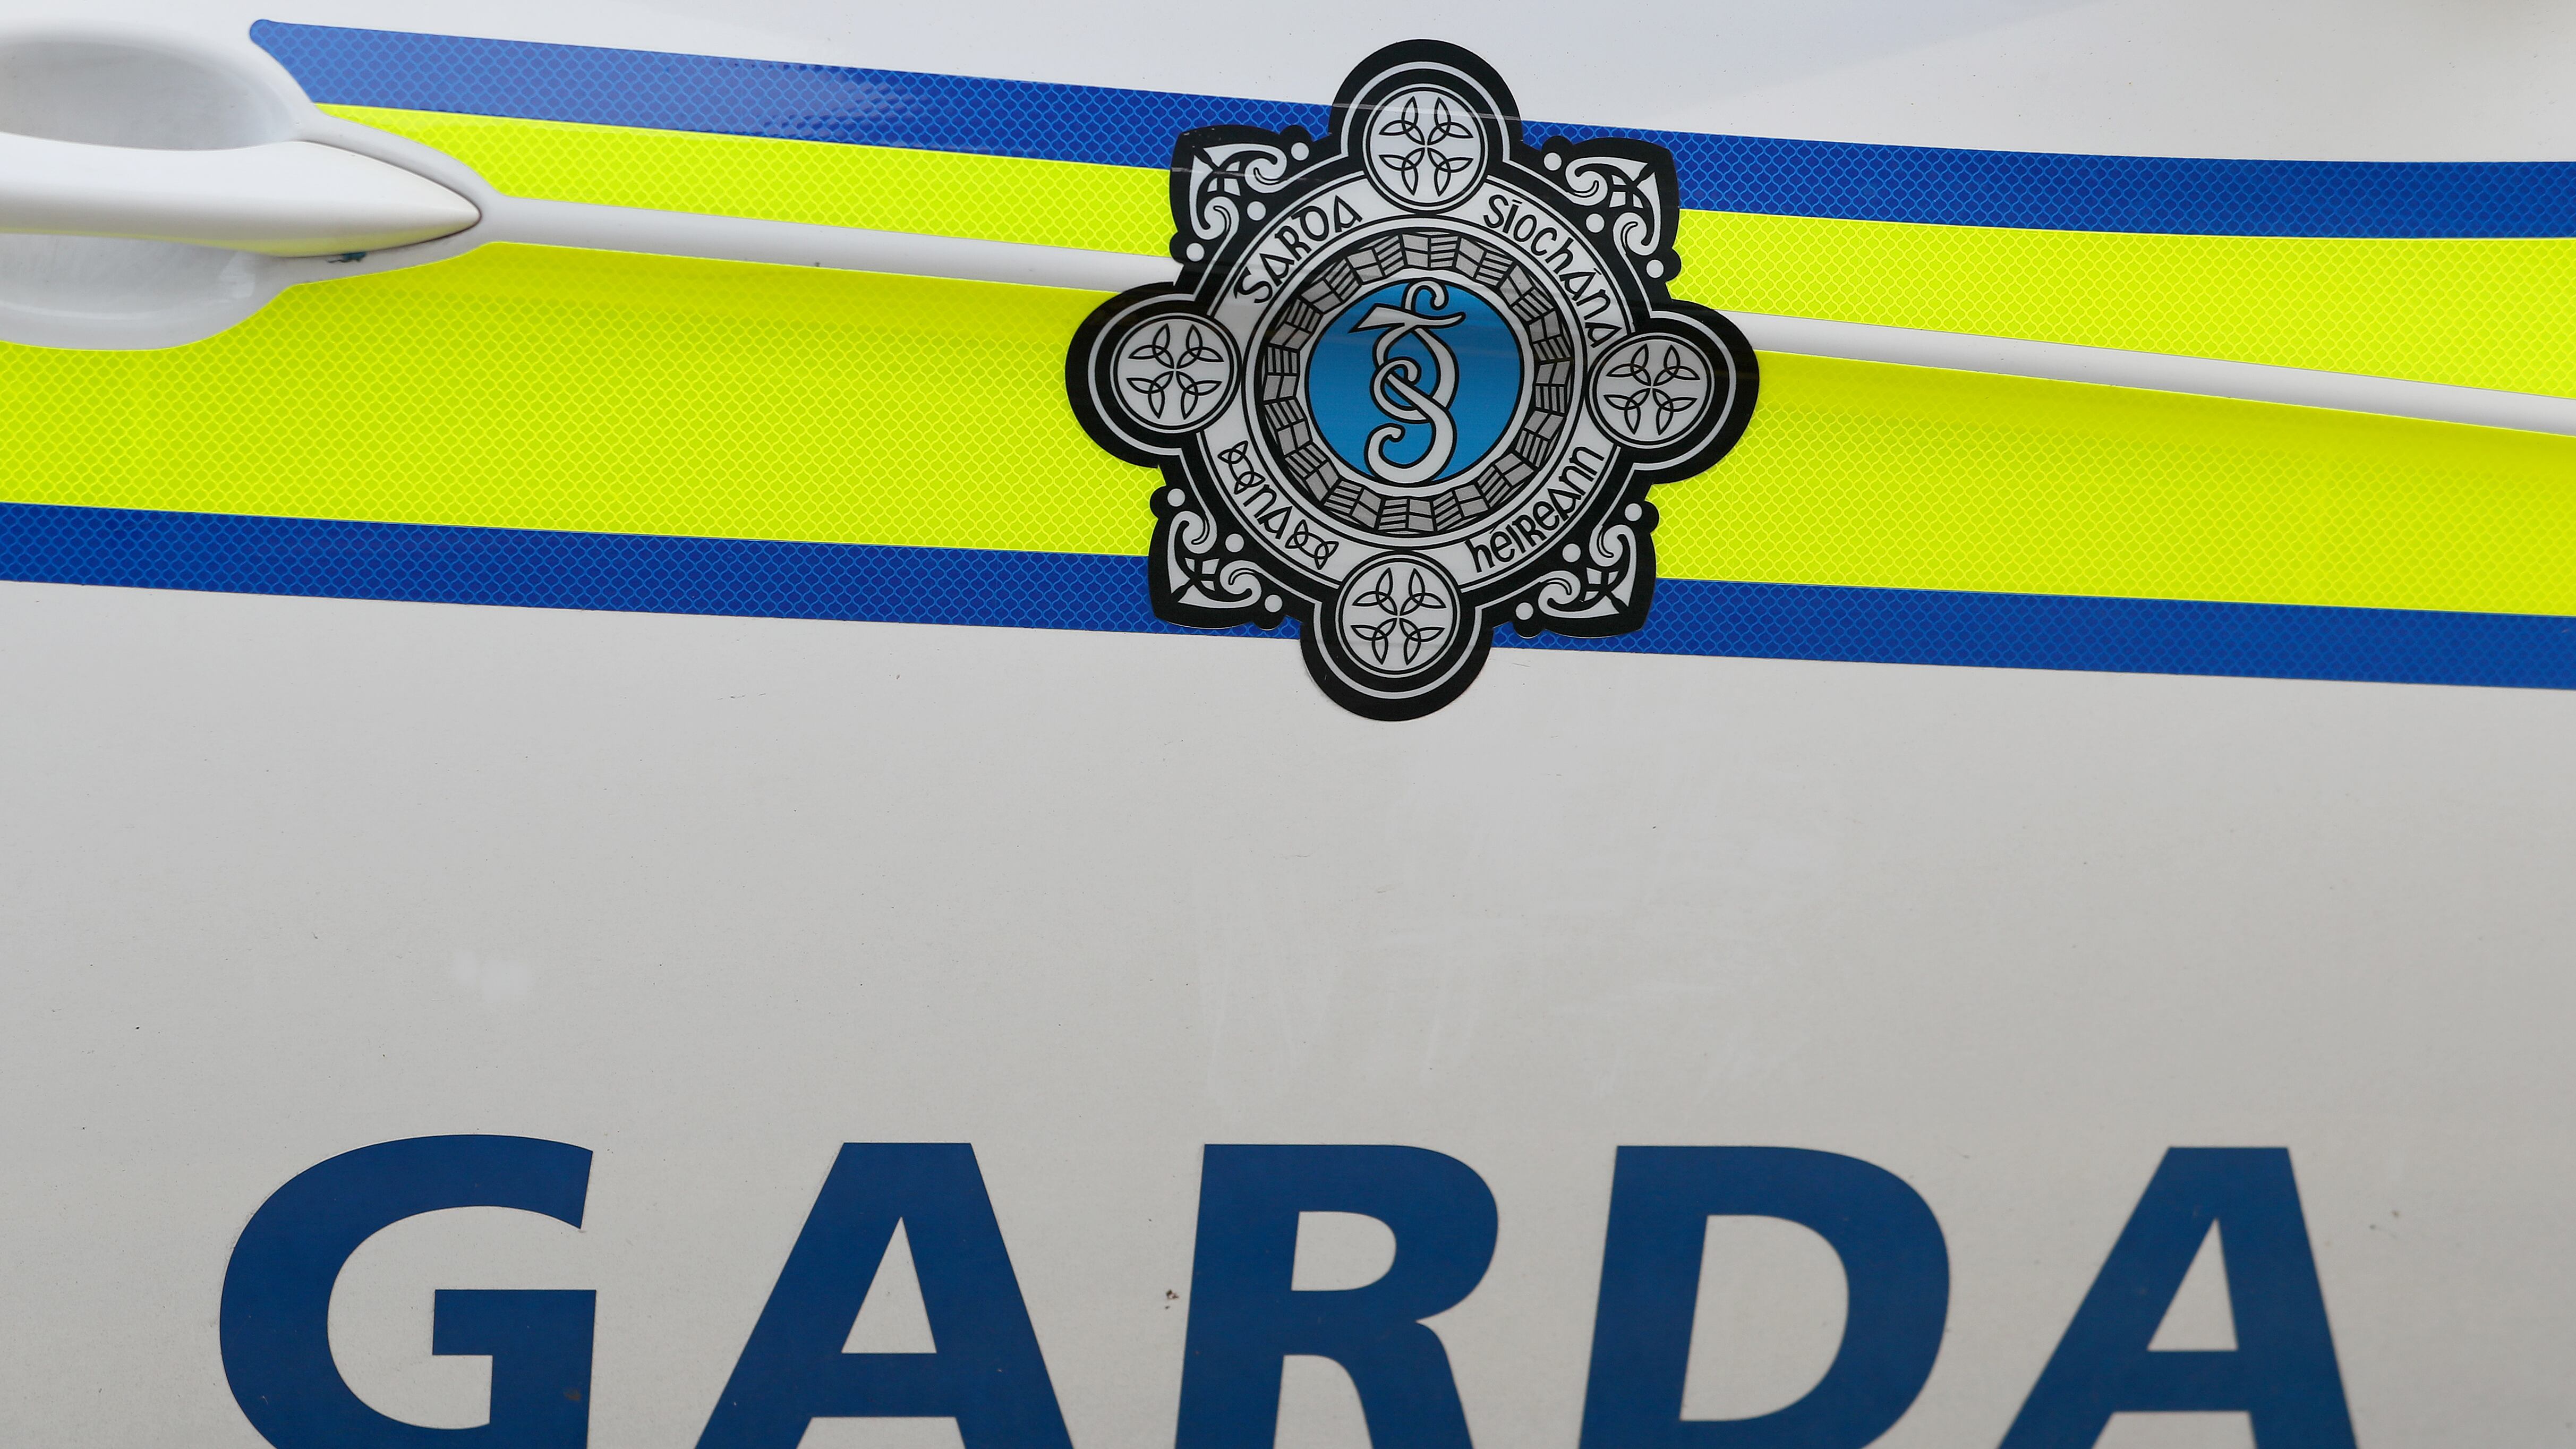 Gardai are appealing for witnesses